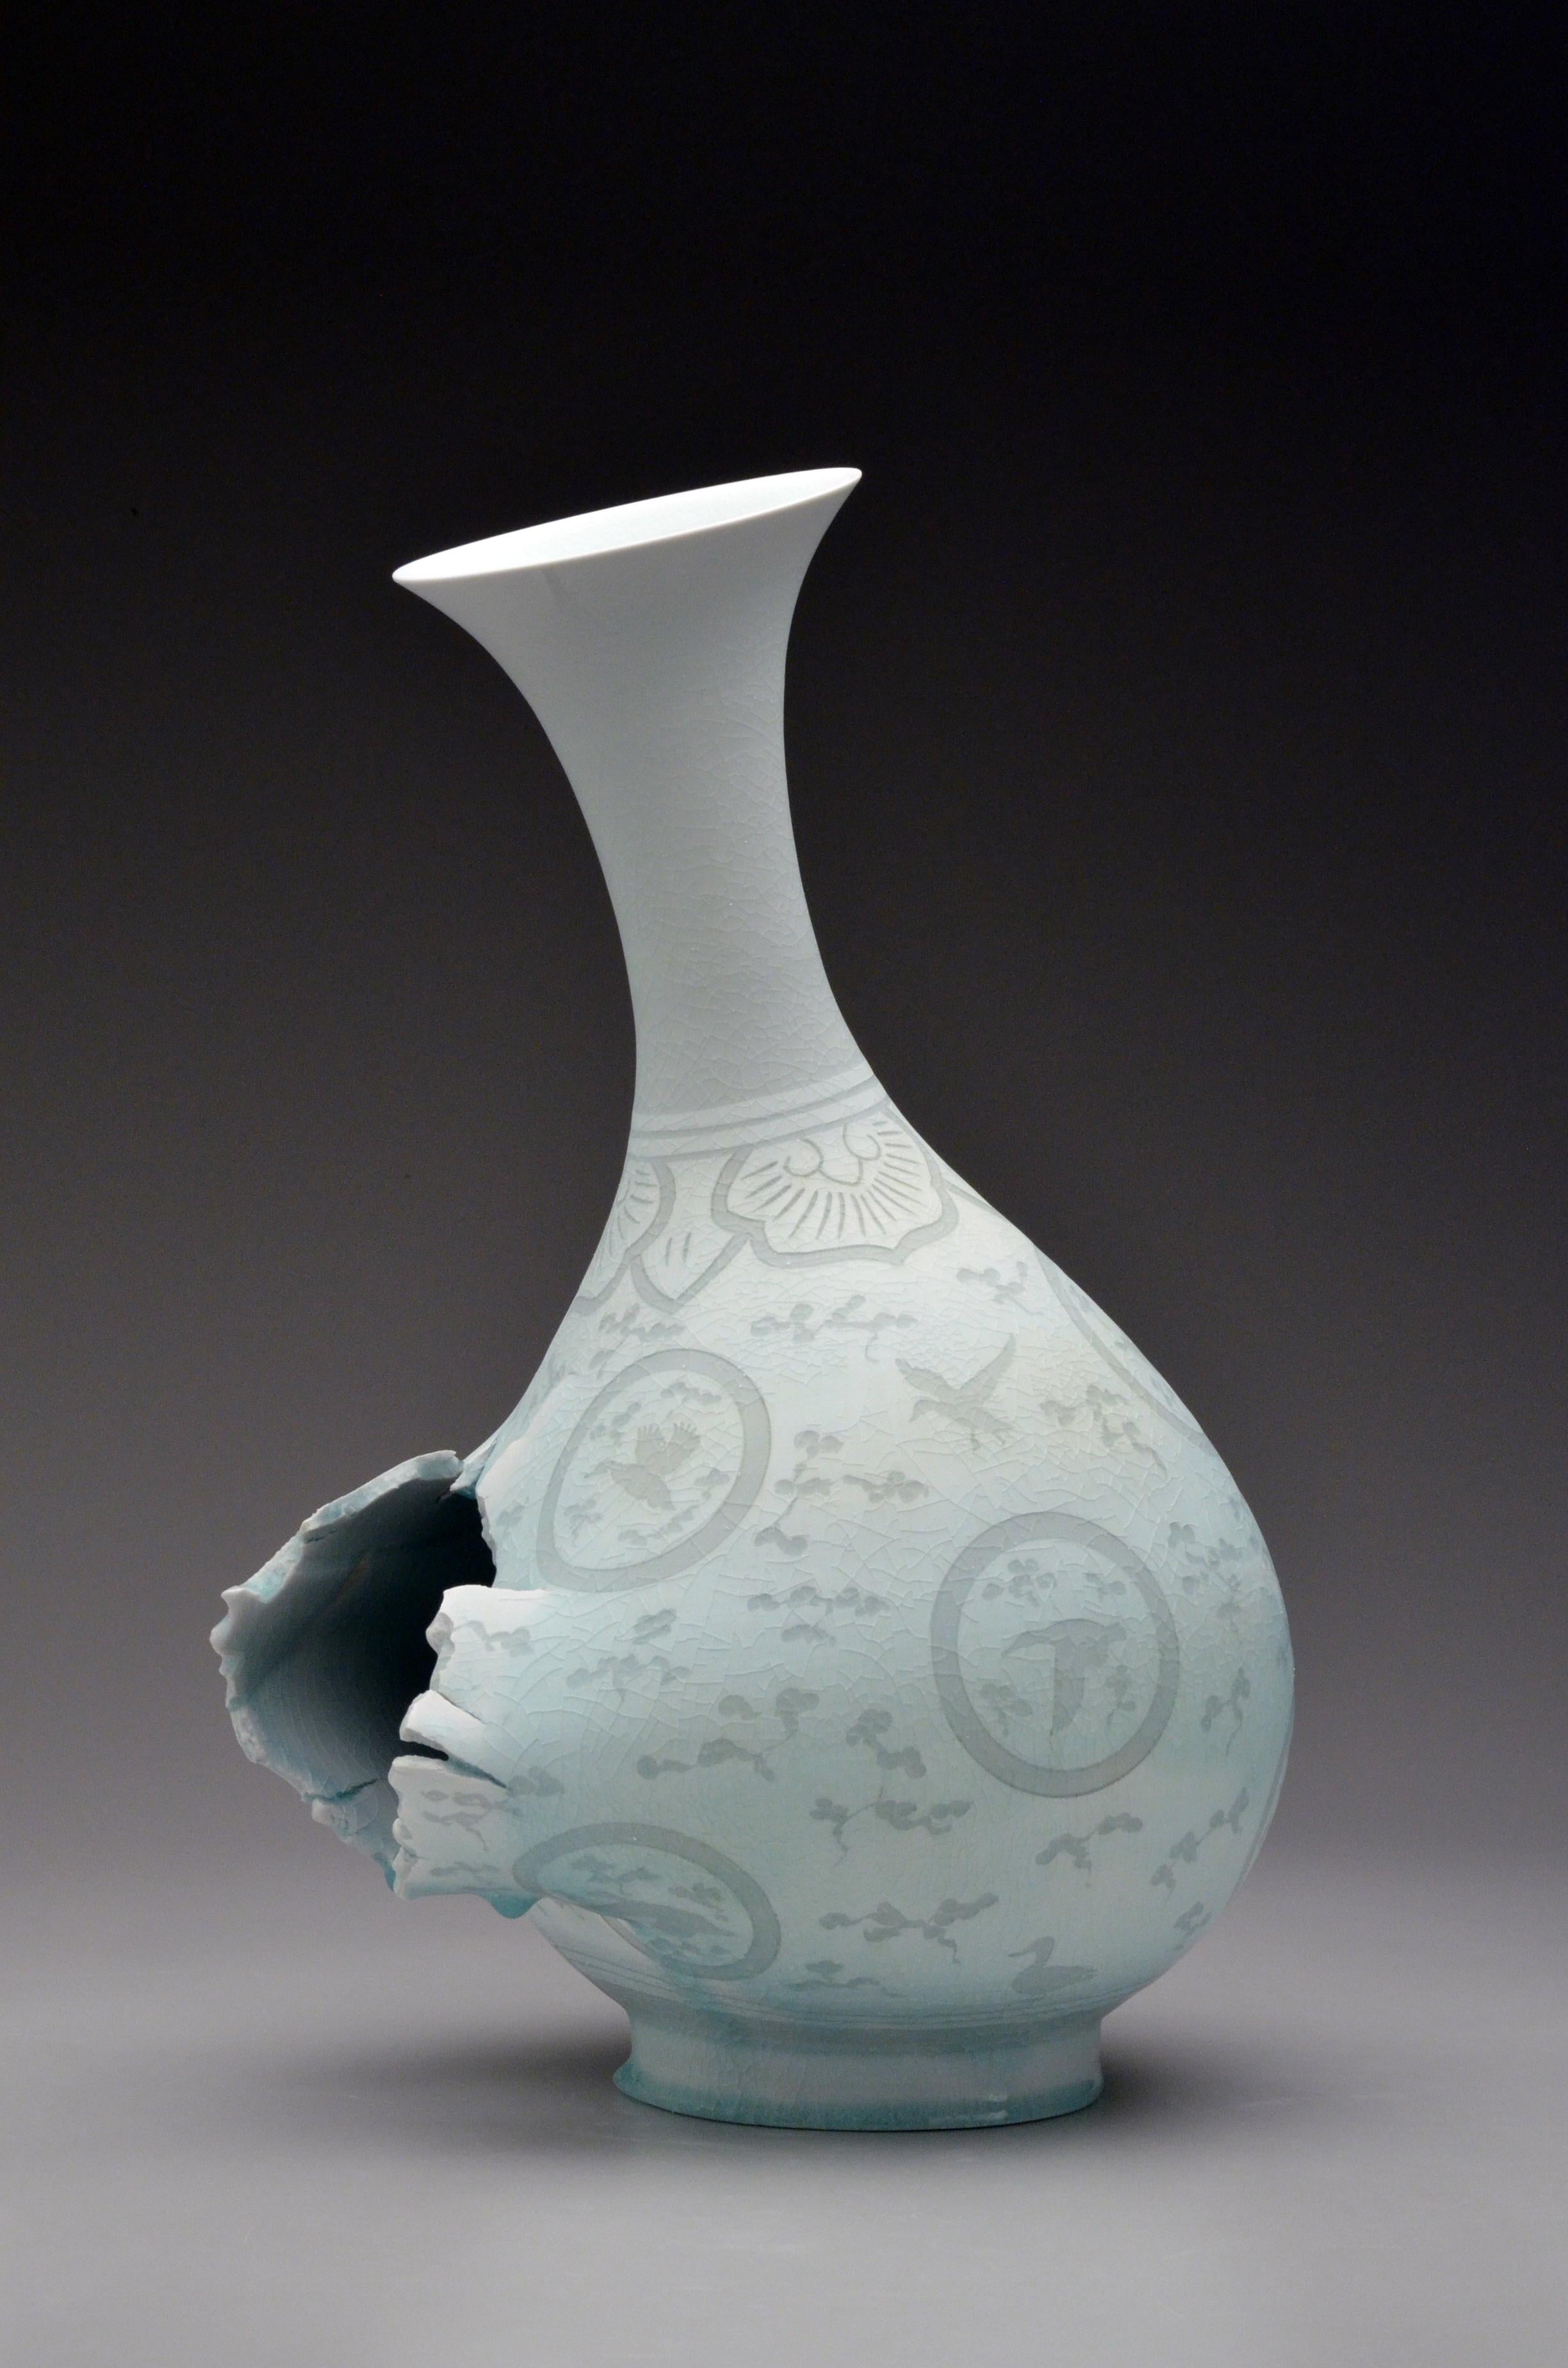 Contemporary Porcelain Ceramic Sculpture with Surface Illustration and Glaze 2